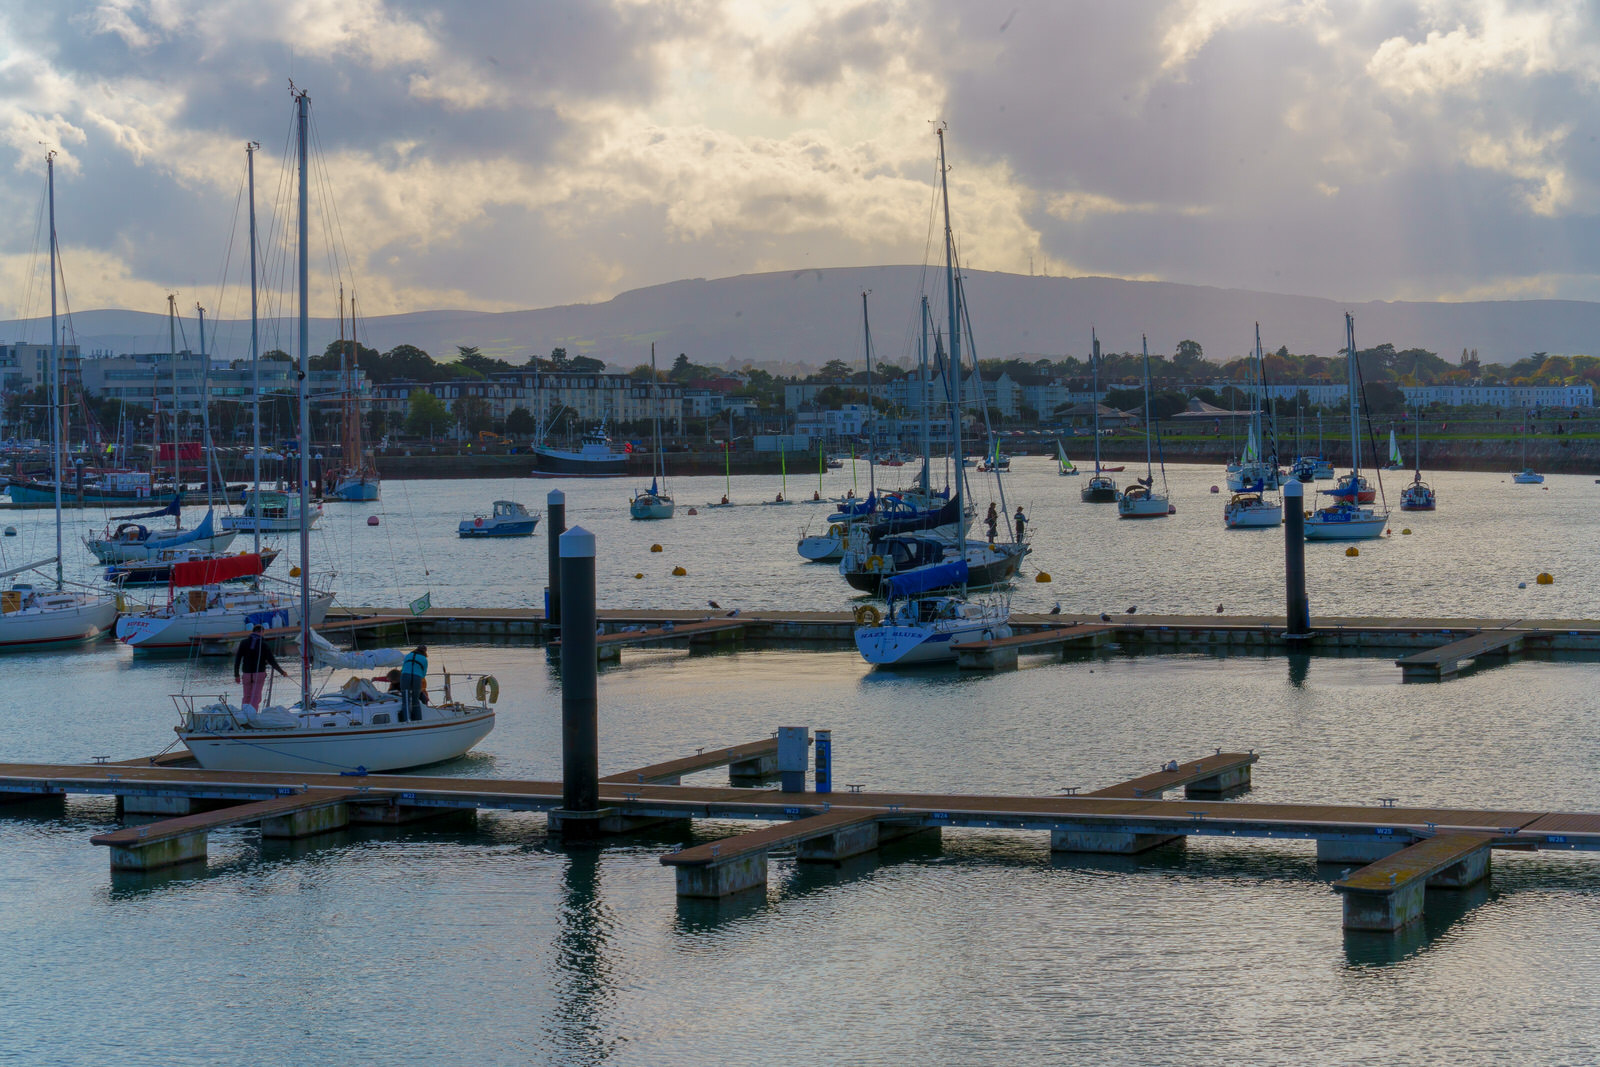 THE SECTION OF THE MARINA NEAR THE WESTERN BREAKWATER [DUN LAOGHAIRE HARBOUR]
 008